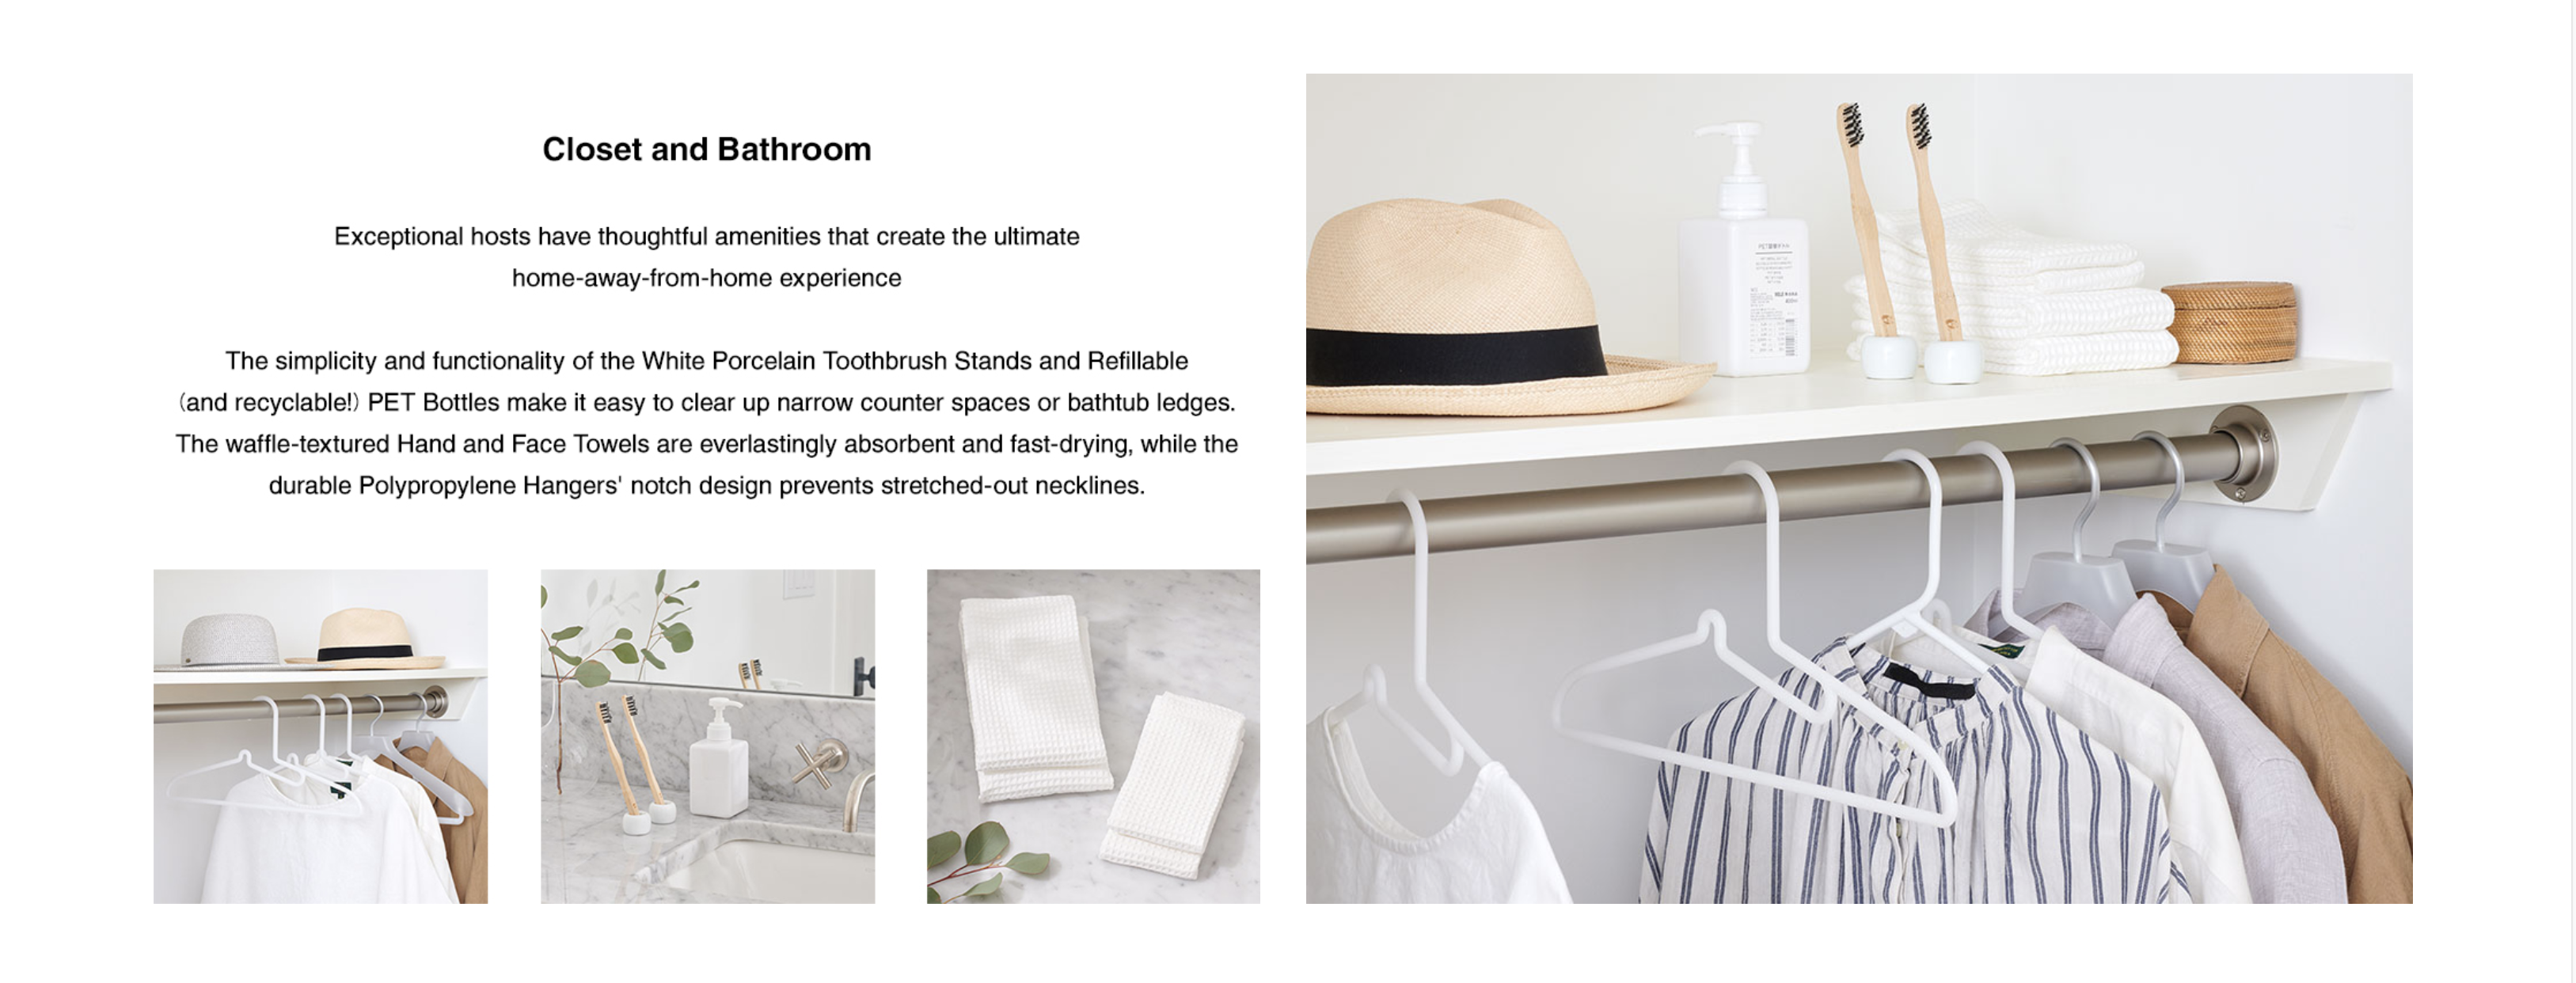 Air bnb and muji Ad of closet organization by Alison Gootee Photography